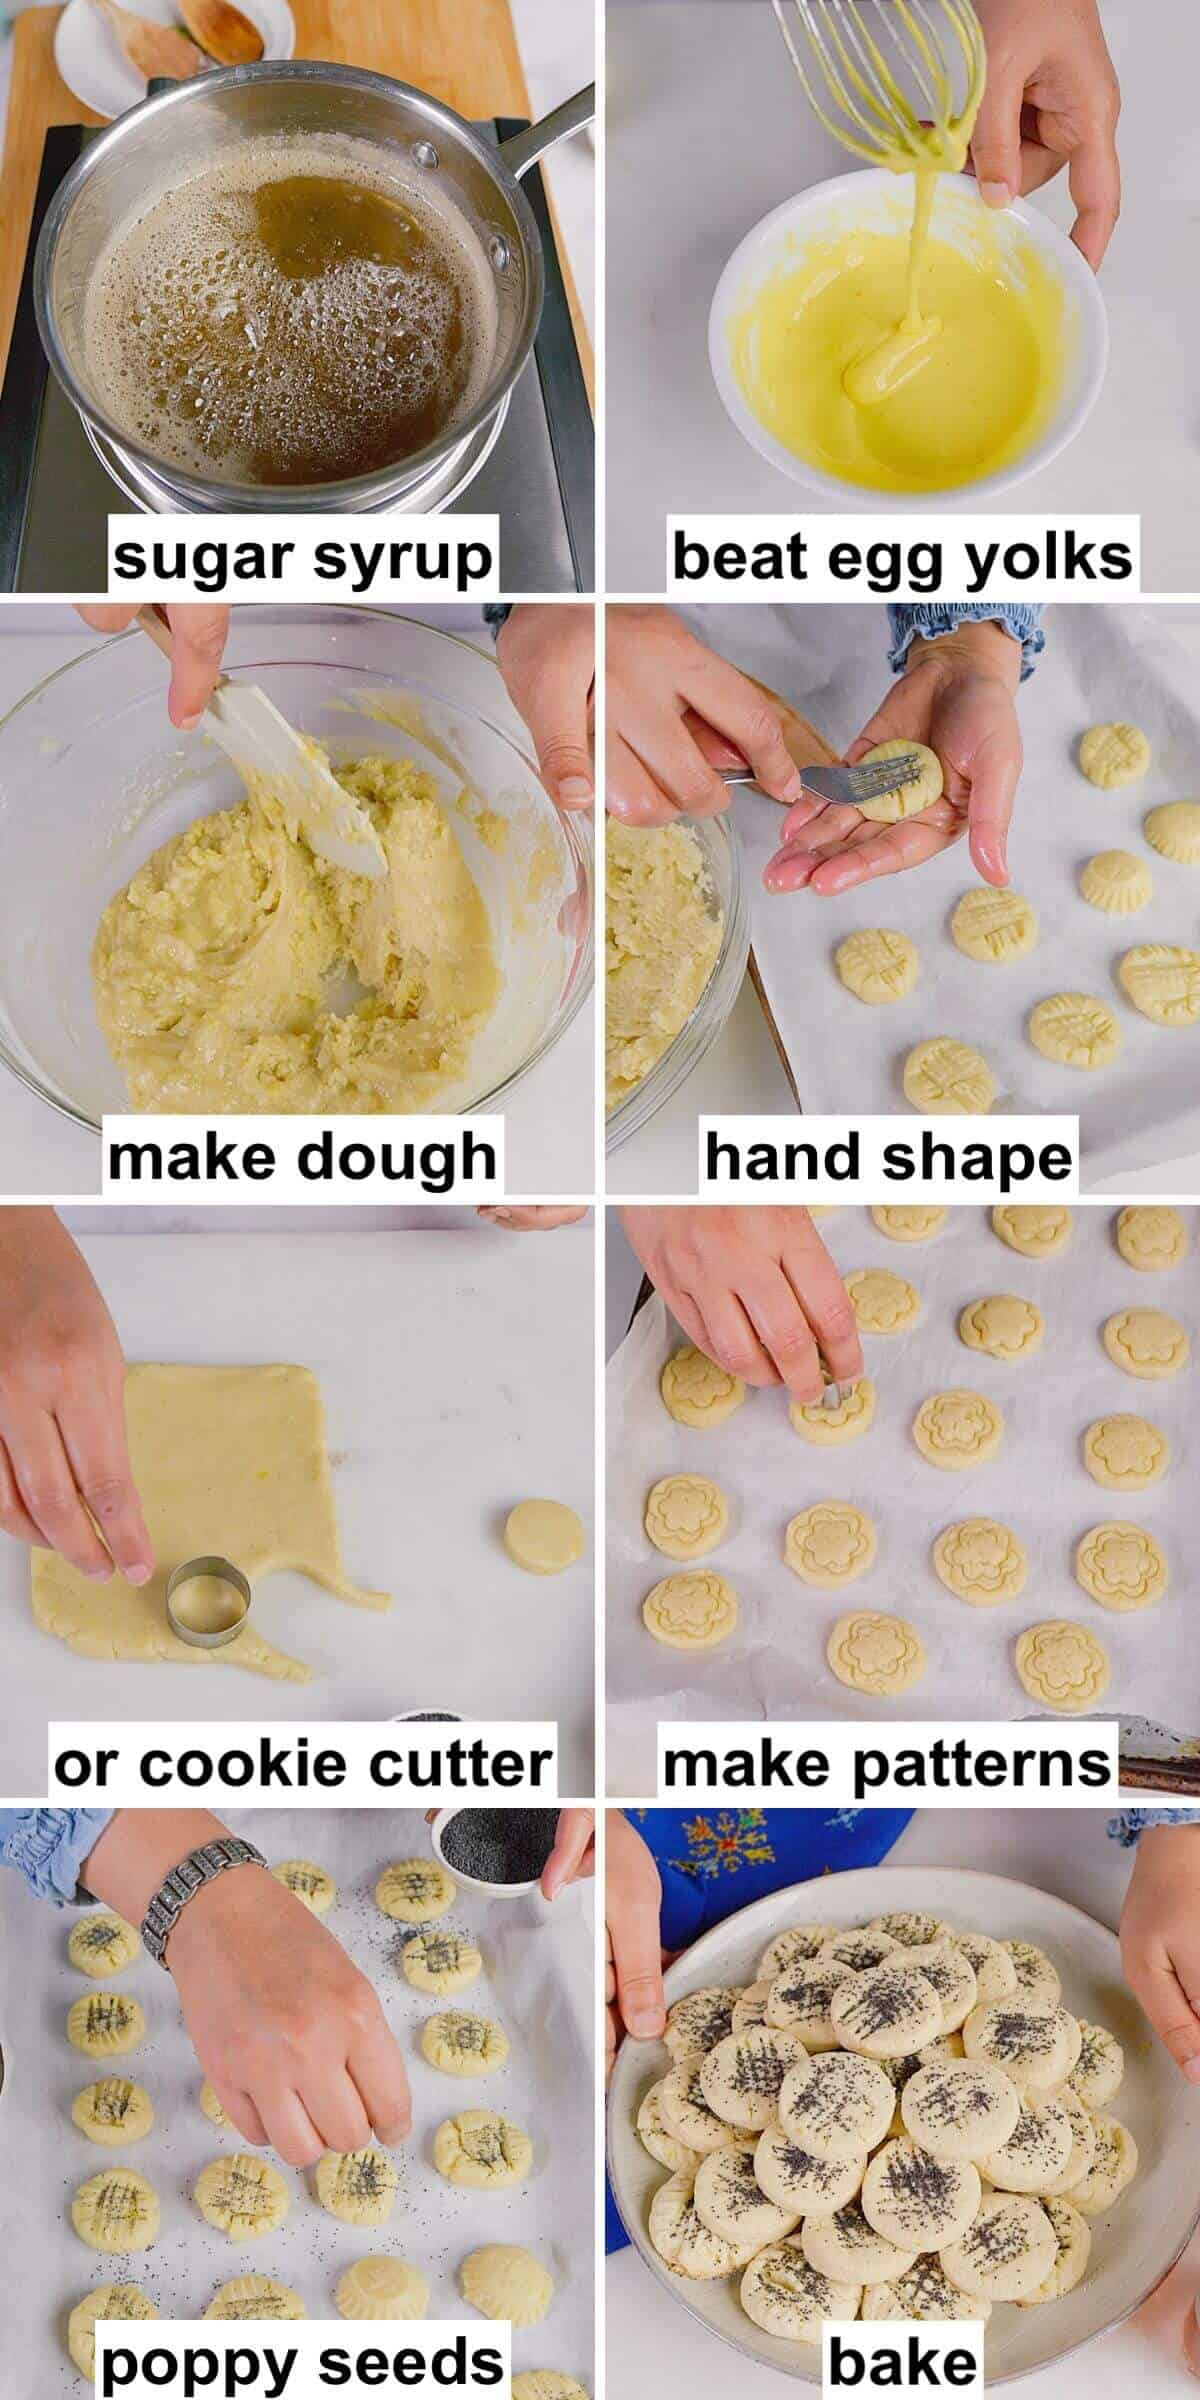 Step by step process of making the cookies.